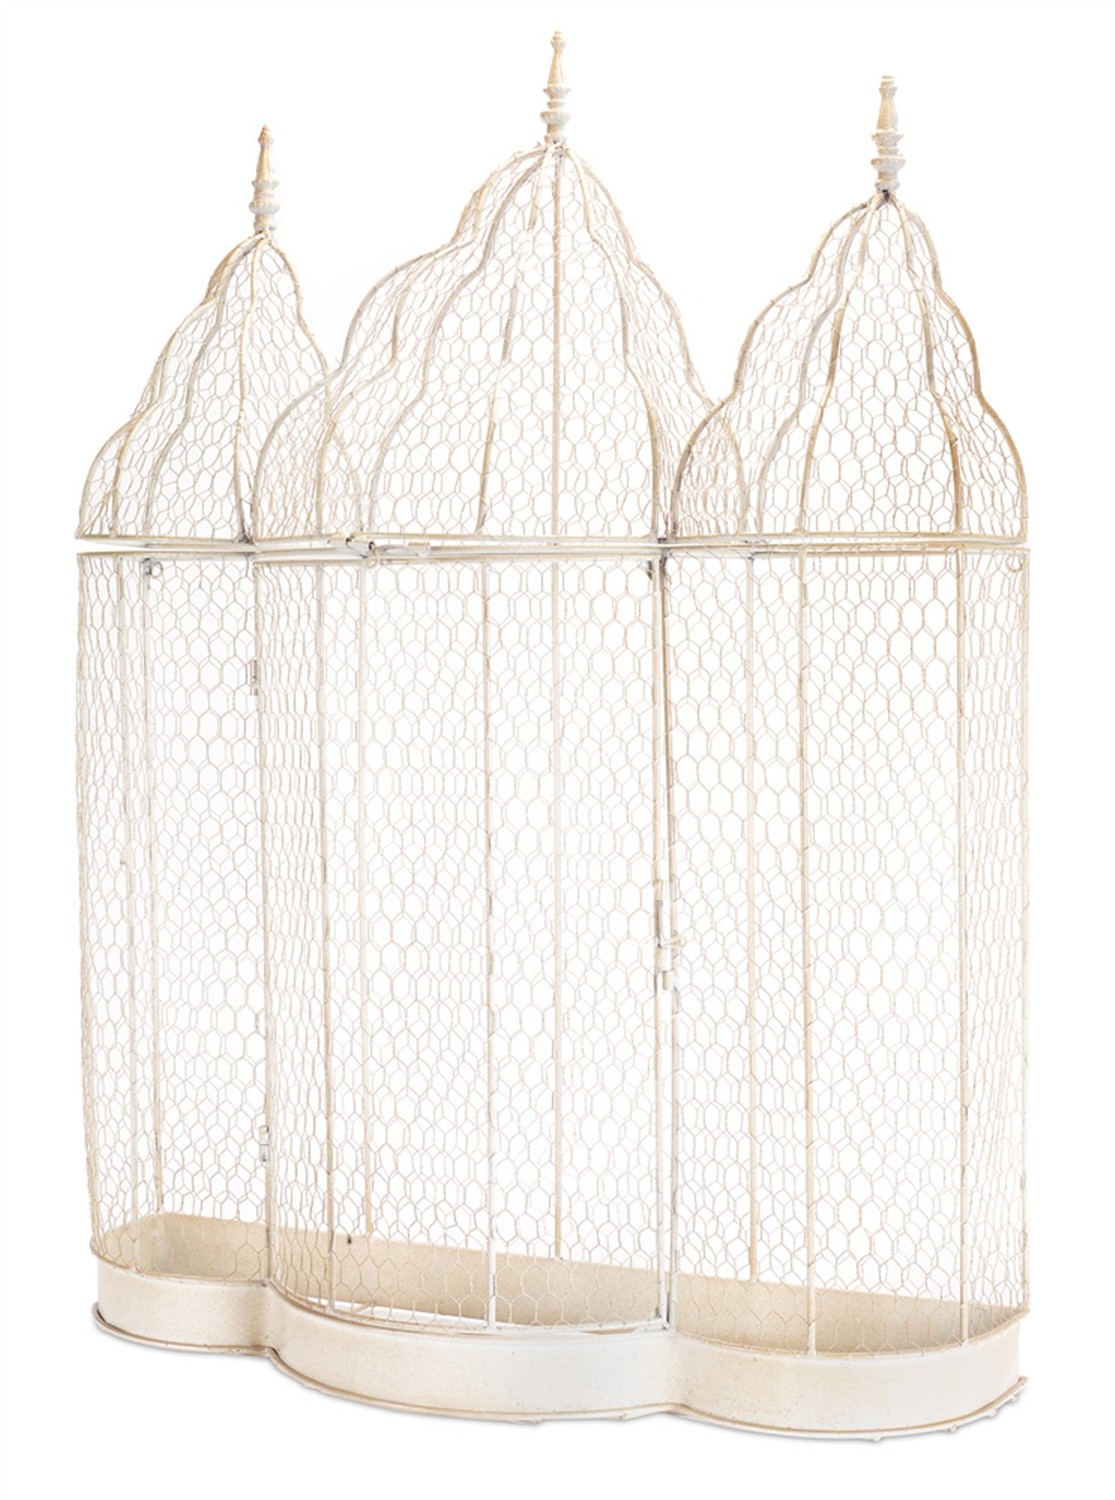 Chicken Wire Cage Wall Decor 26.5"L, 35"H Metal